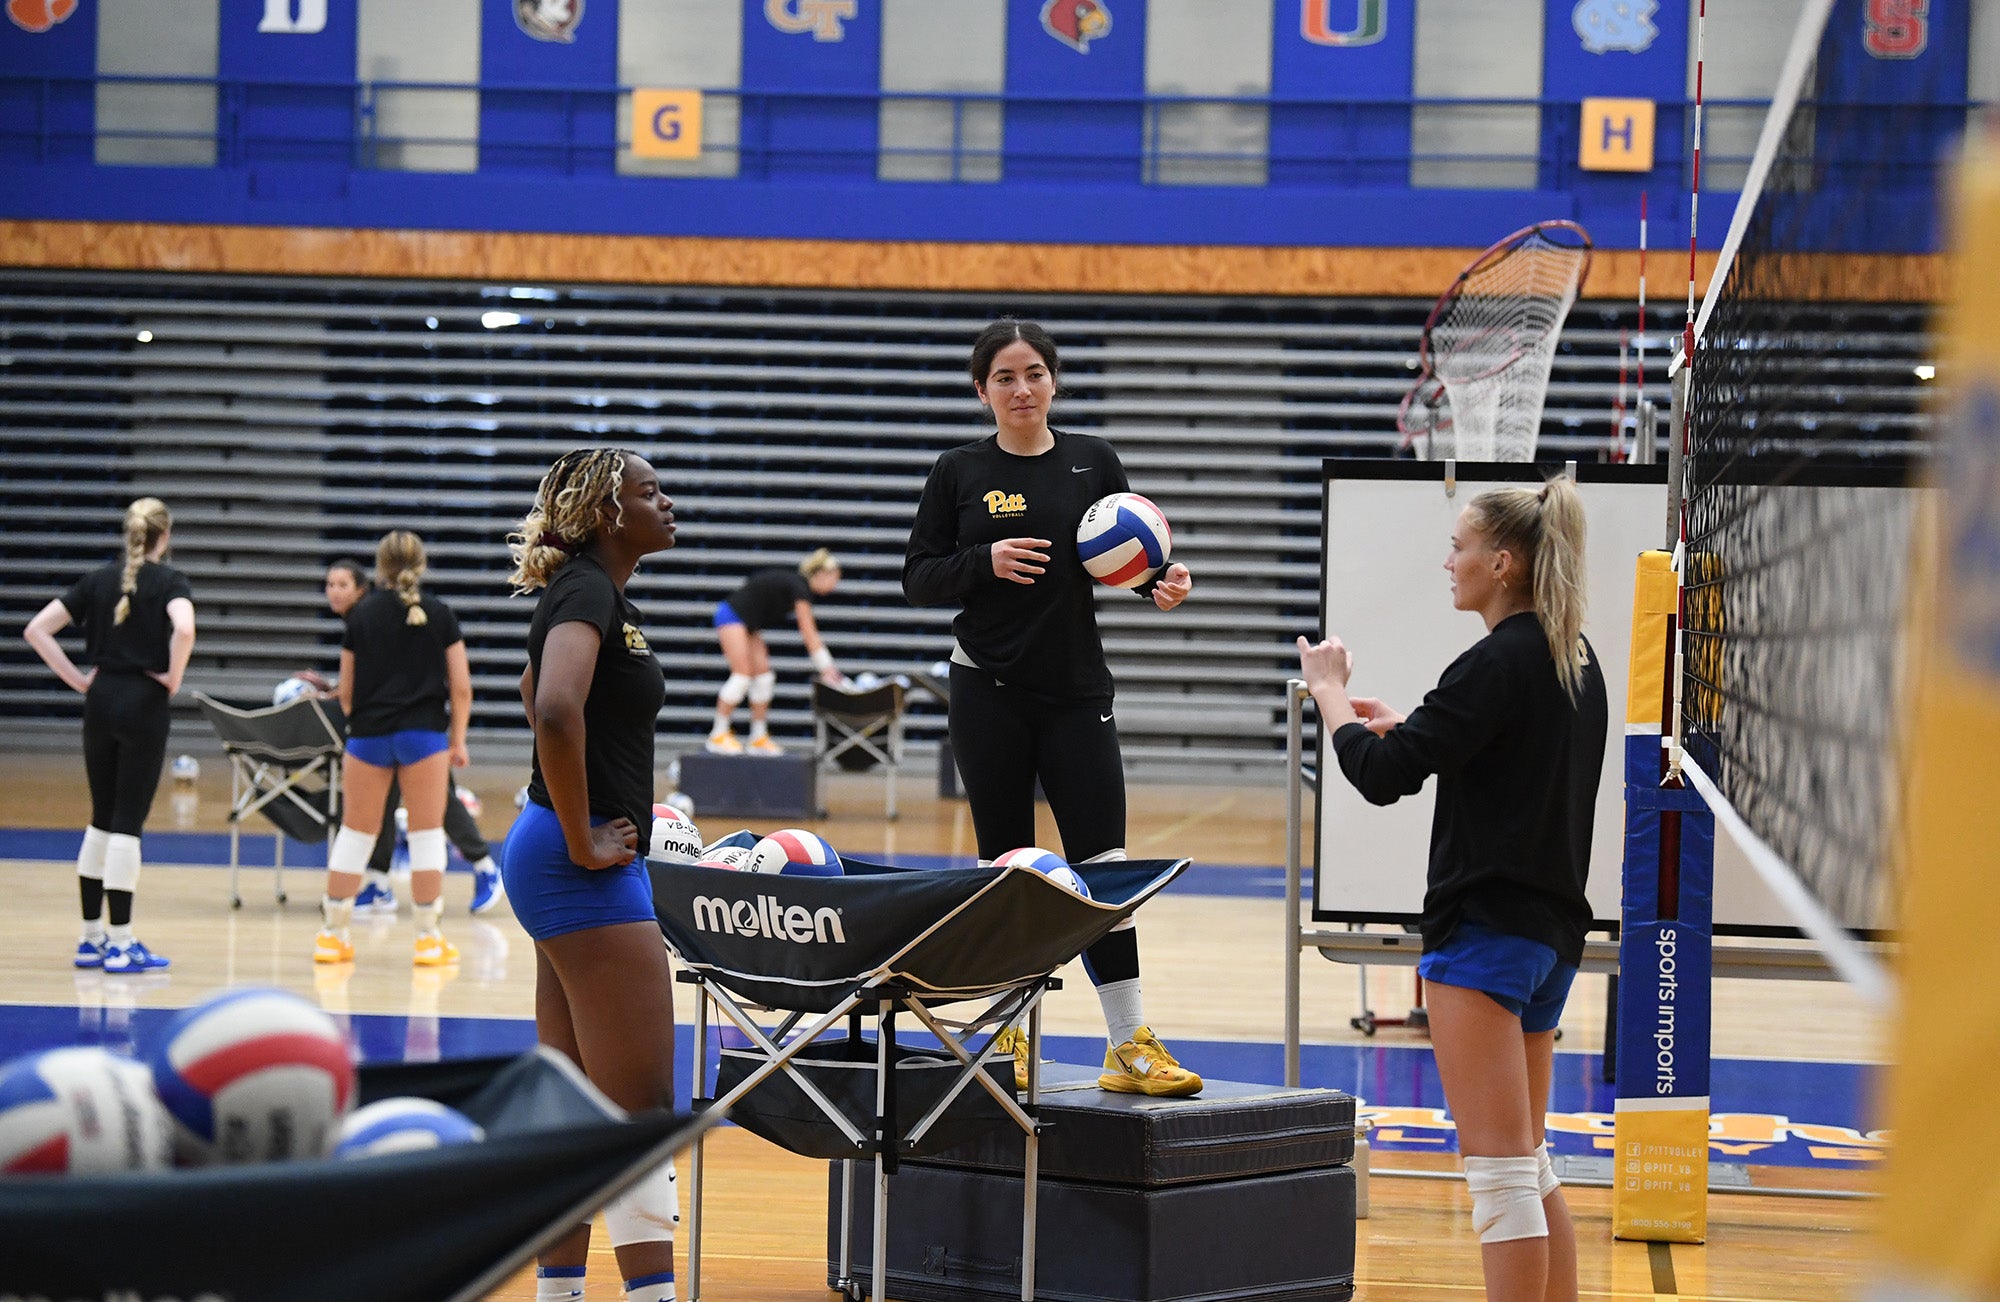 Three volleyball players talk on equipment in the gym